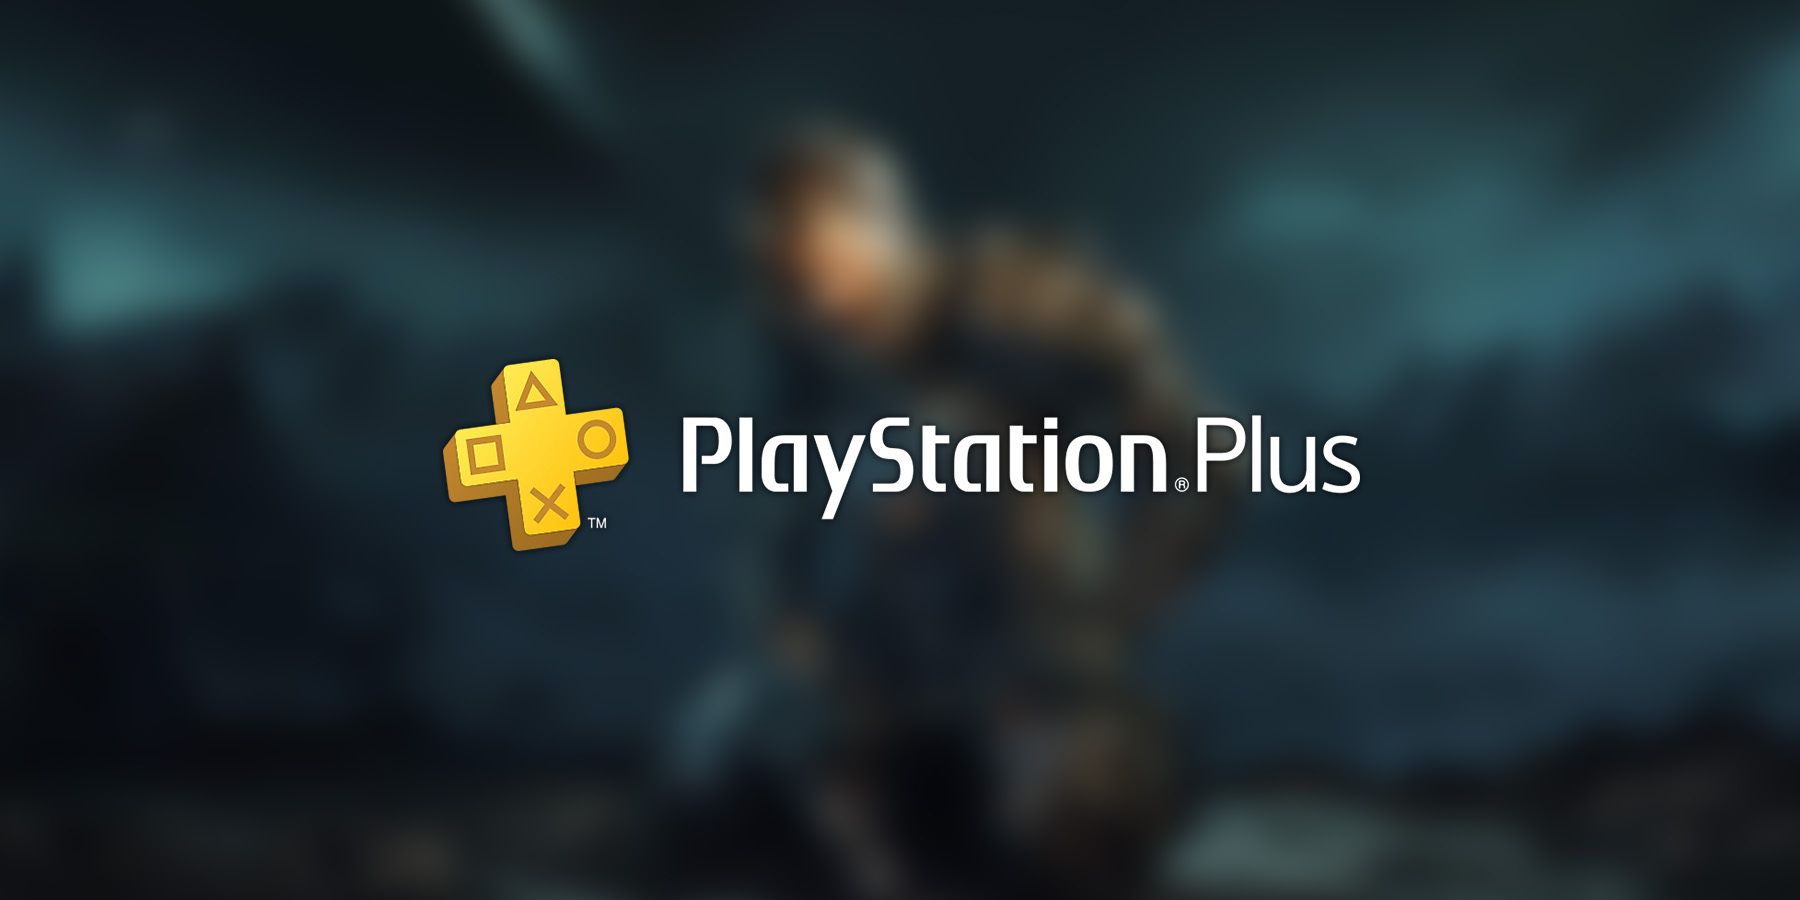 The Callisto Protocol is coming to PlayStation Plus